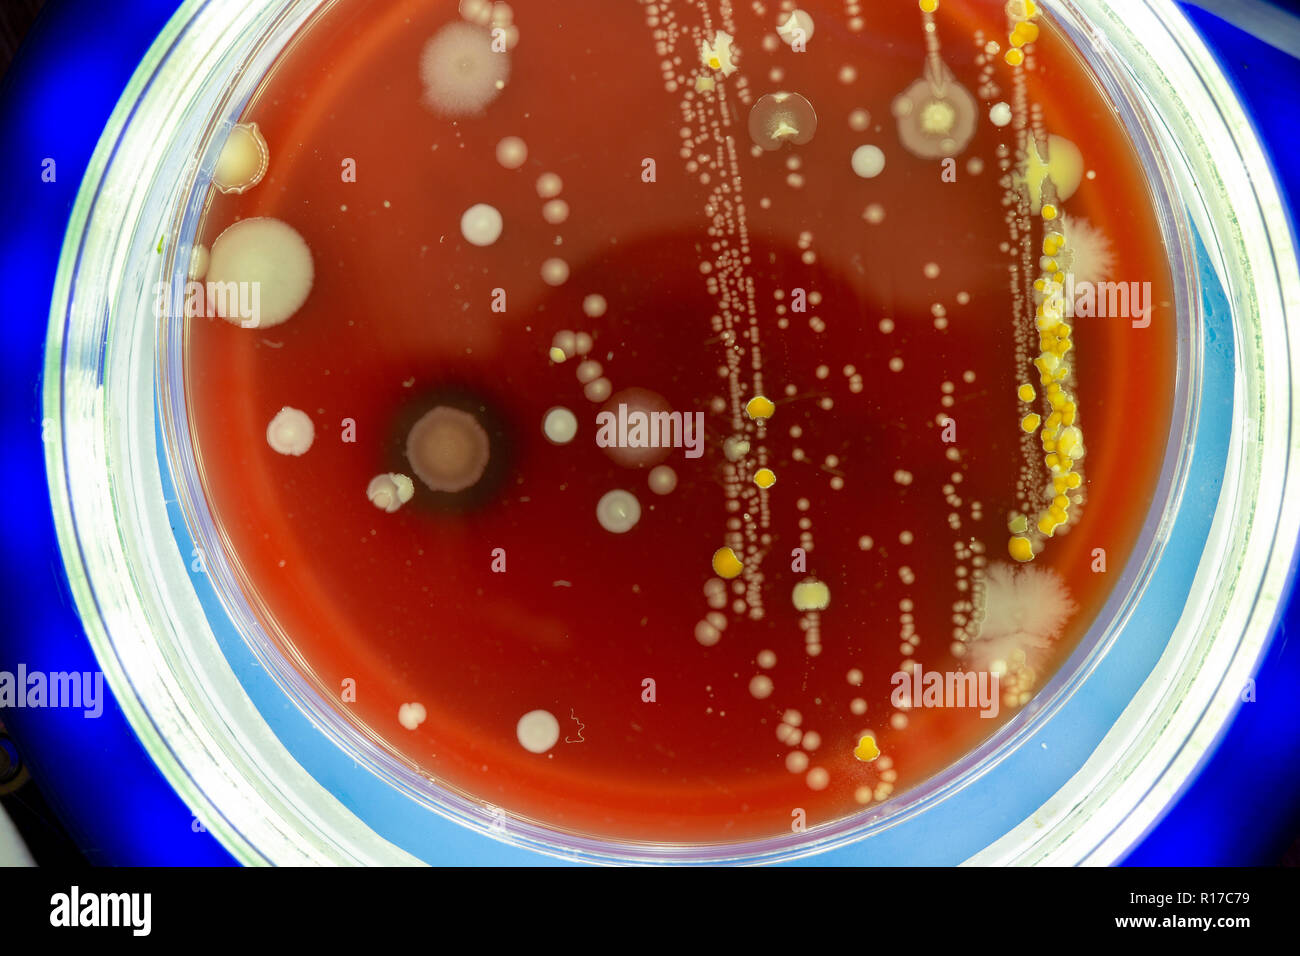 Petri dish with colonies of microbes. Stock Photo